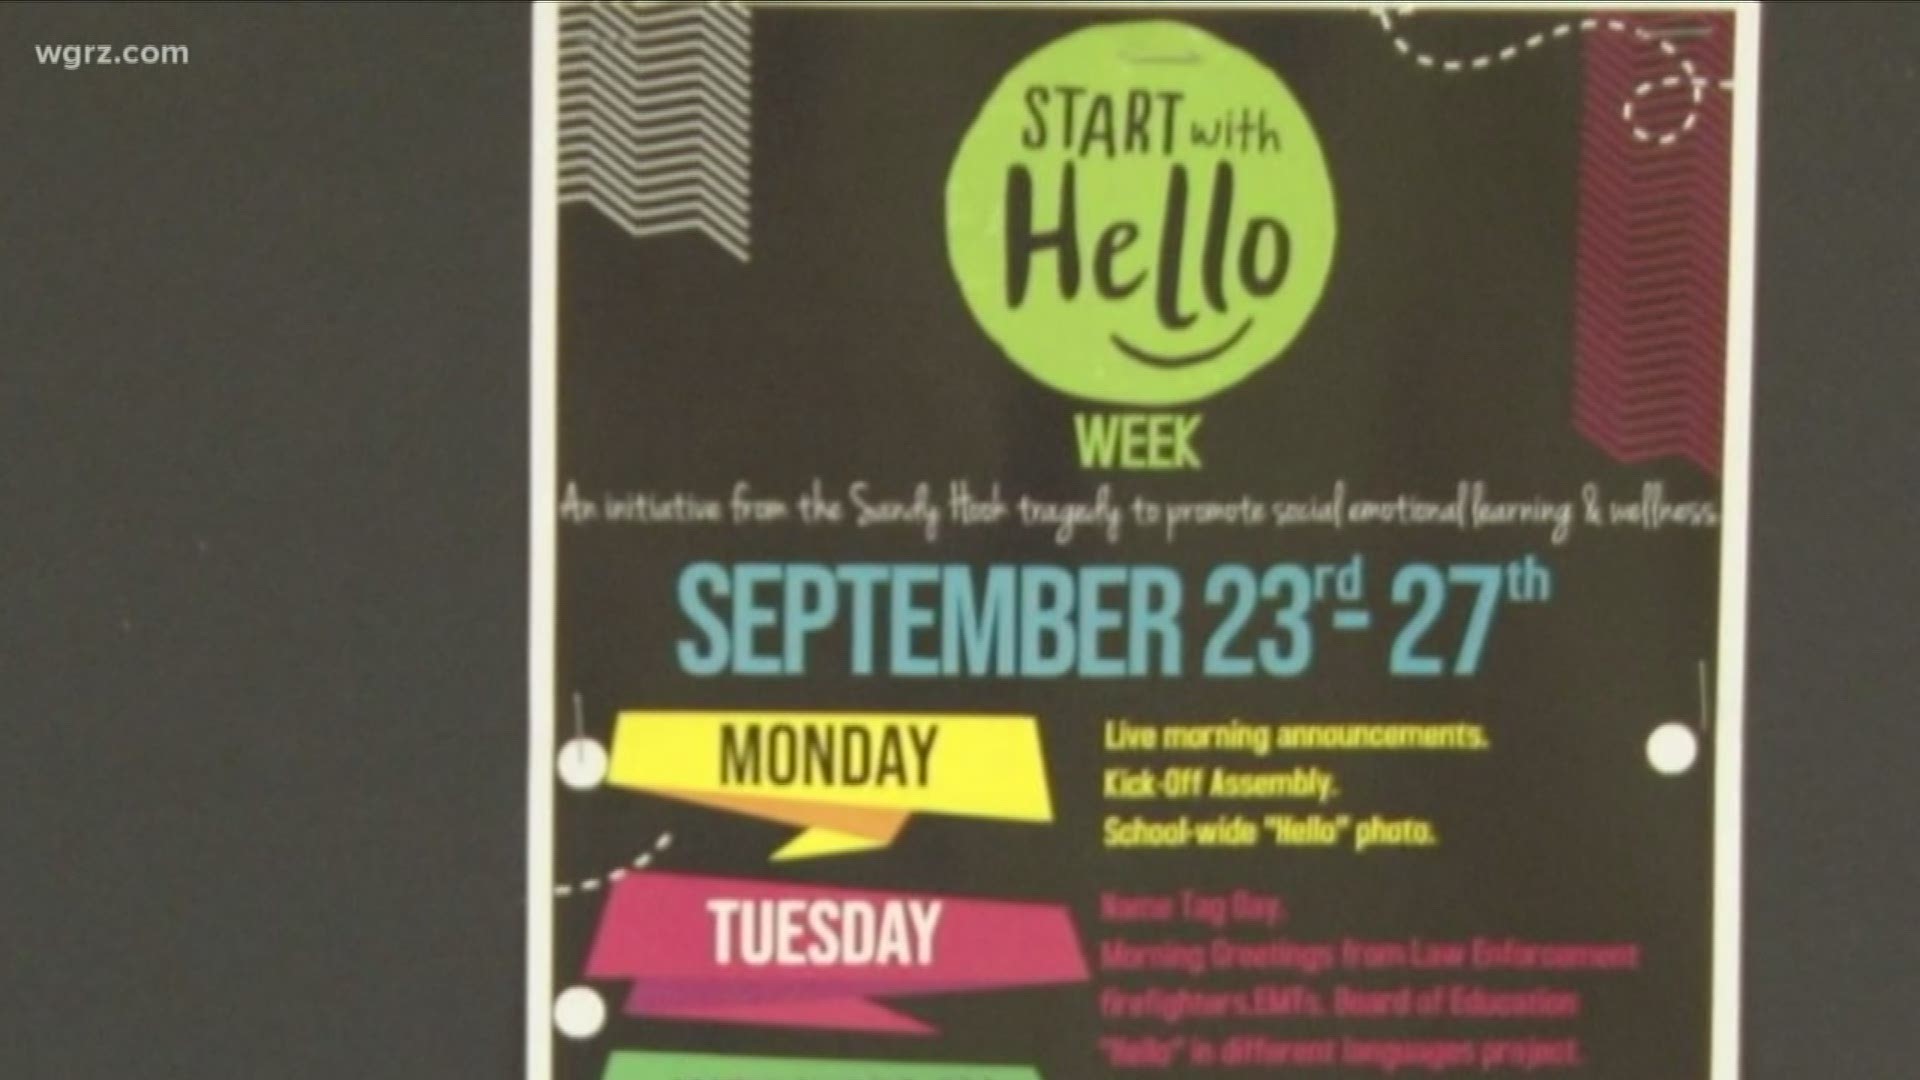 Encouraging students to 'Start with Hello'